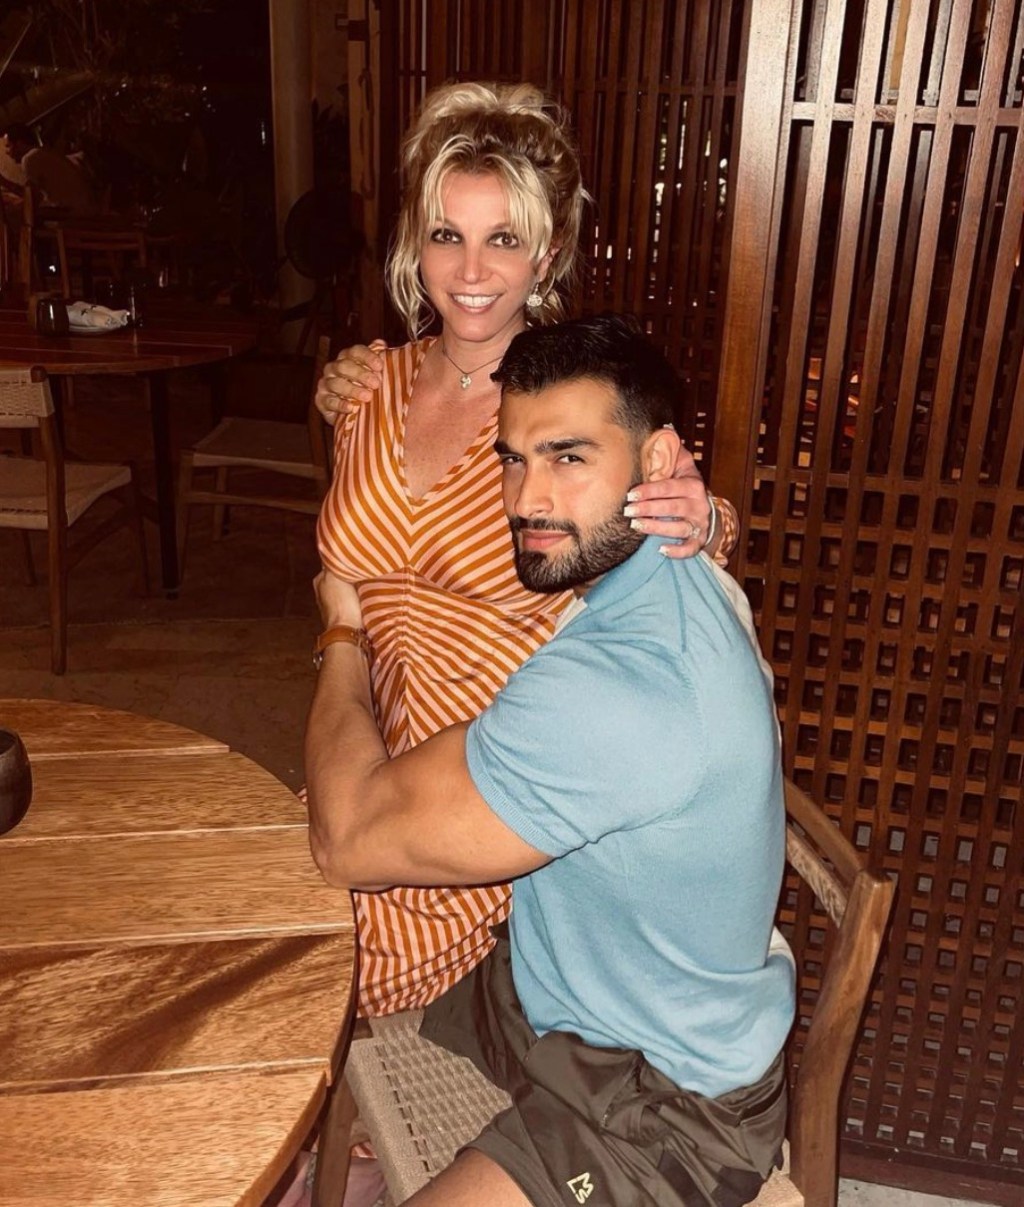 Britney Spears and Sam Asghari are no longer on speaking terms, with their respective divorce lawyers now handling all communication between them, according to a report.